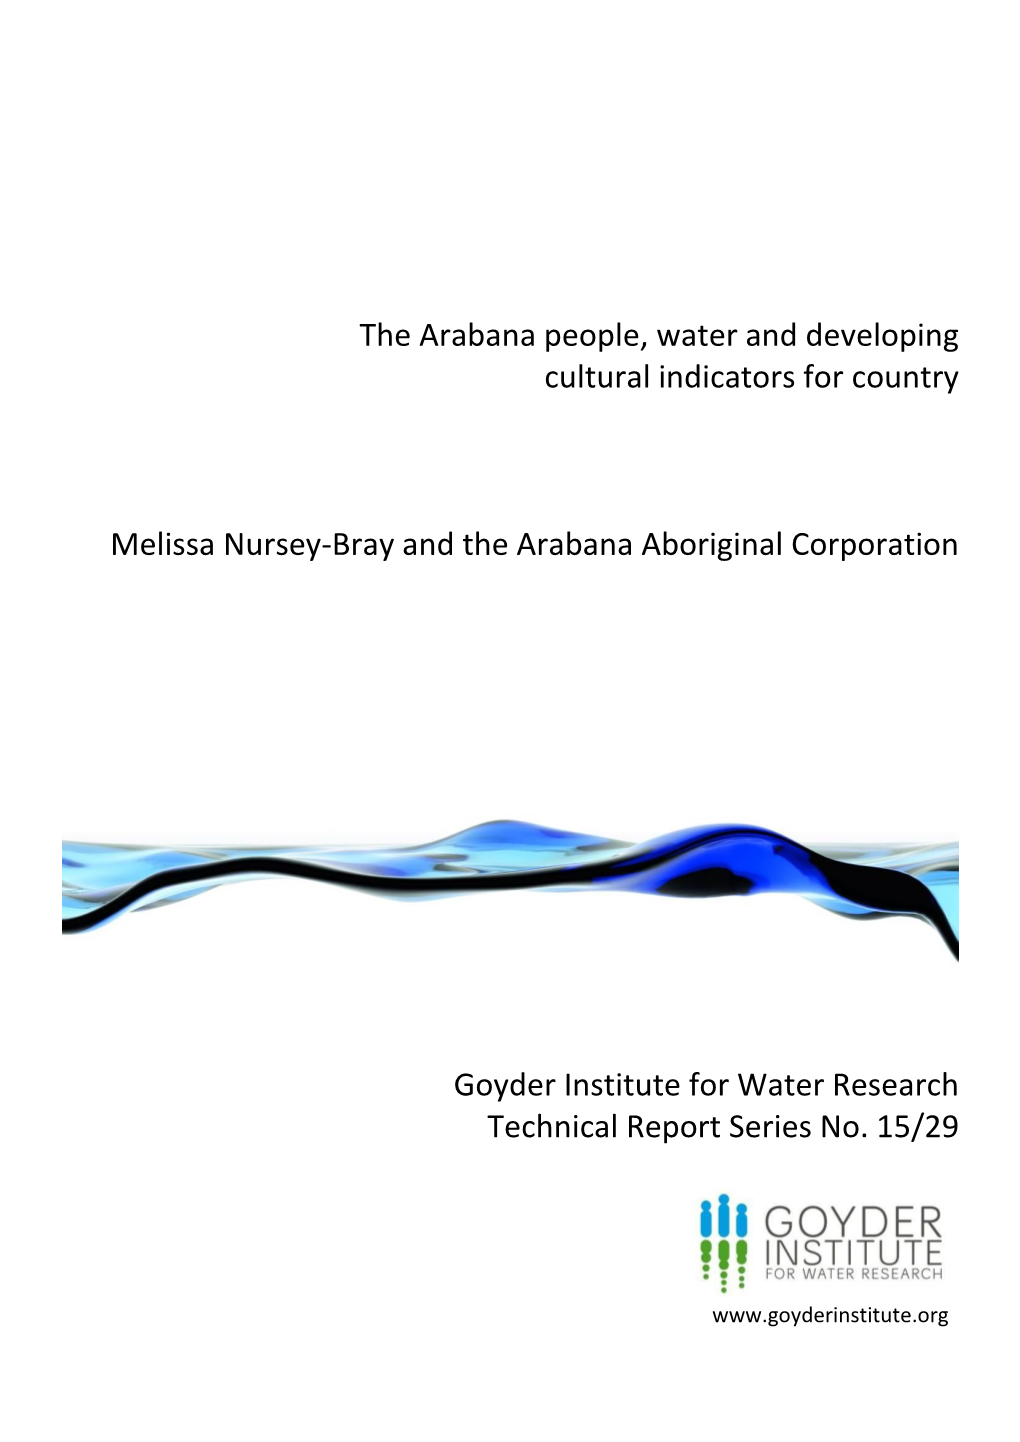 The Arabana People, Water and Developing Cultural Indicators for Country